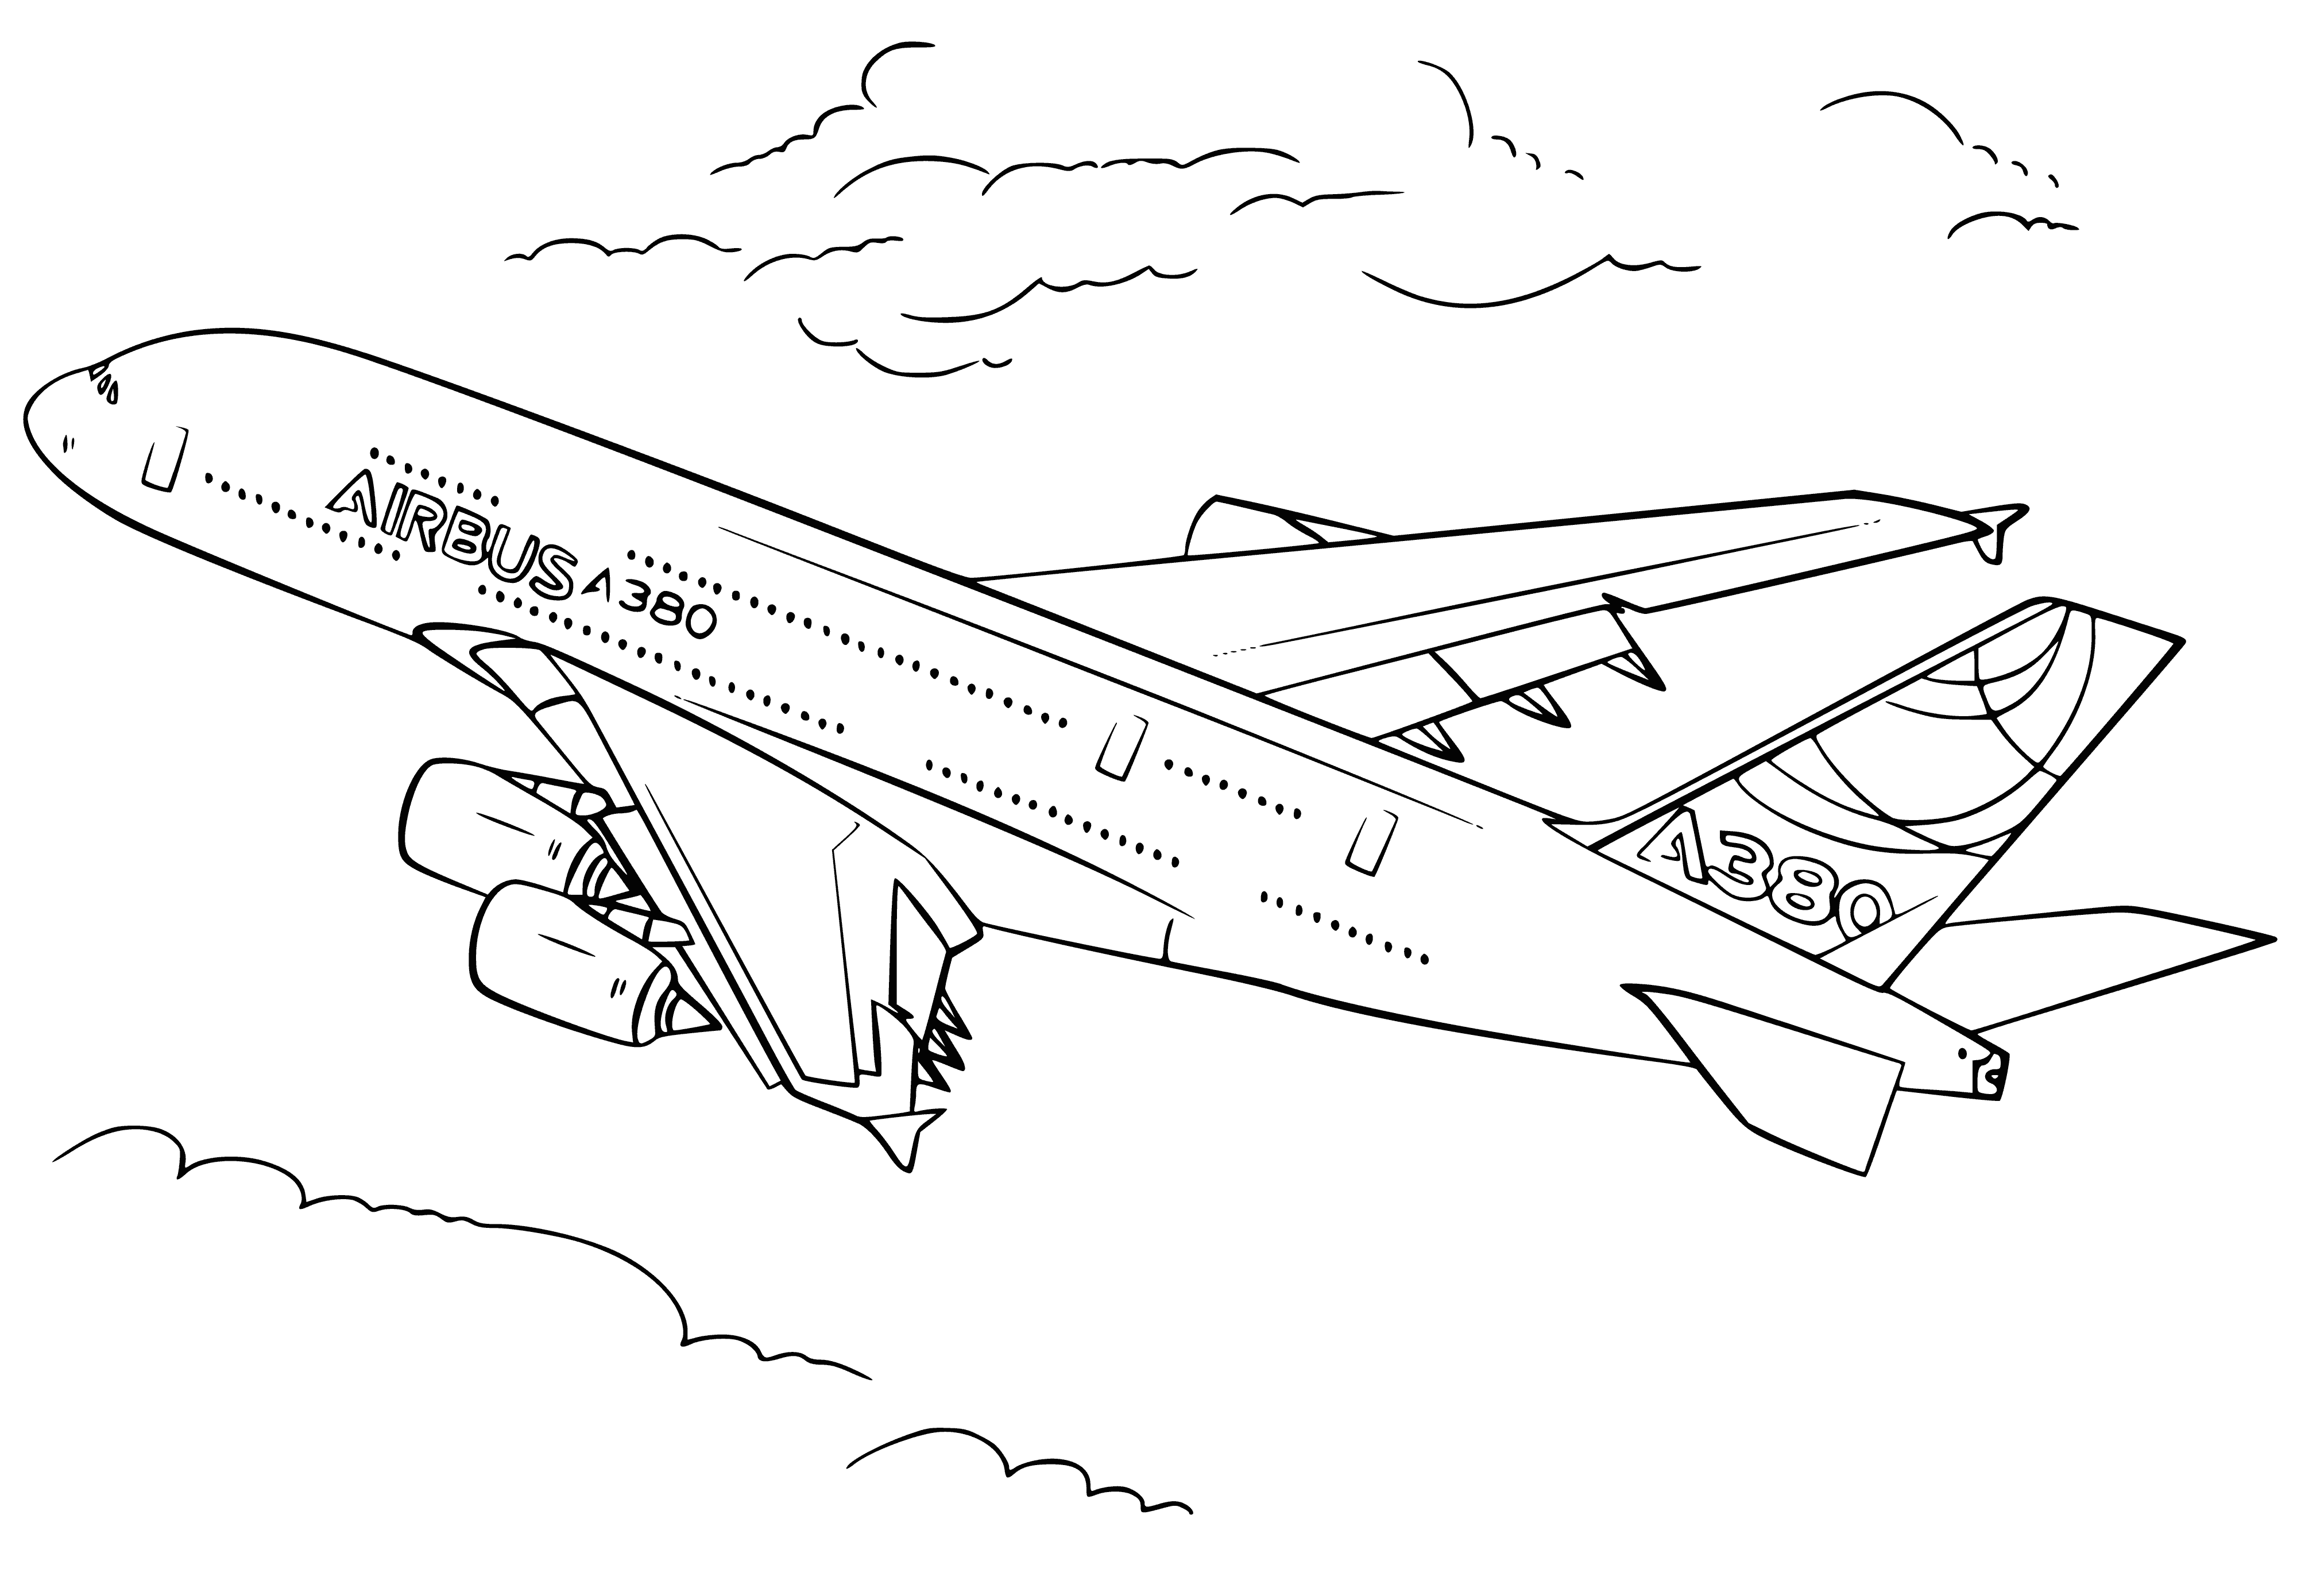 coloring page: 3 large airplanes, helicopter & rocket on coloring page. Largest is commercial airliner, Helicopter taking off, rocket on launchpad.